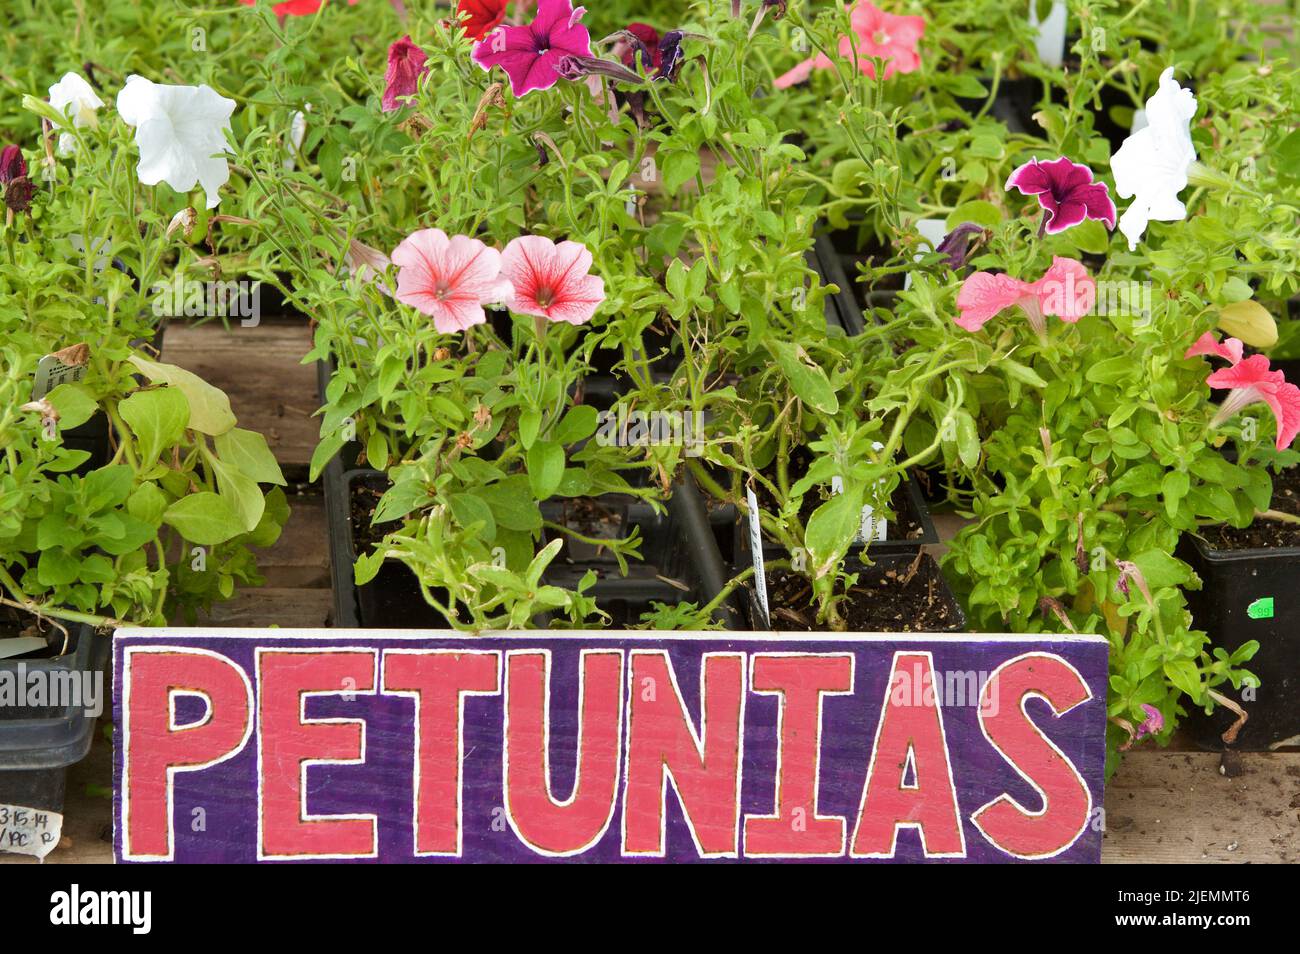 Nursery packs of colorful Petunias ready to plant in the garden. Stock Photo